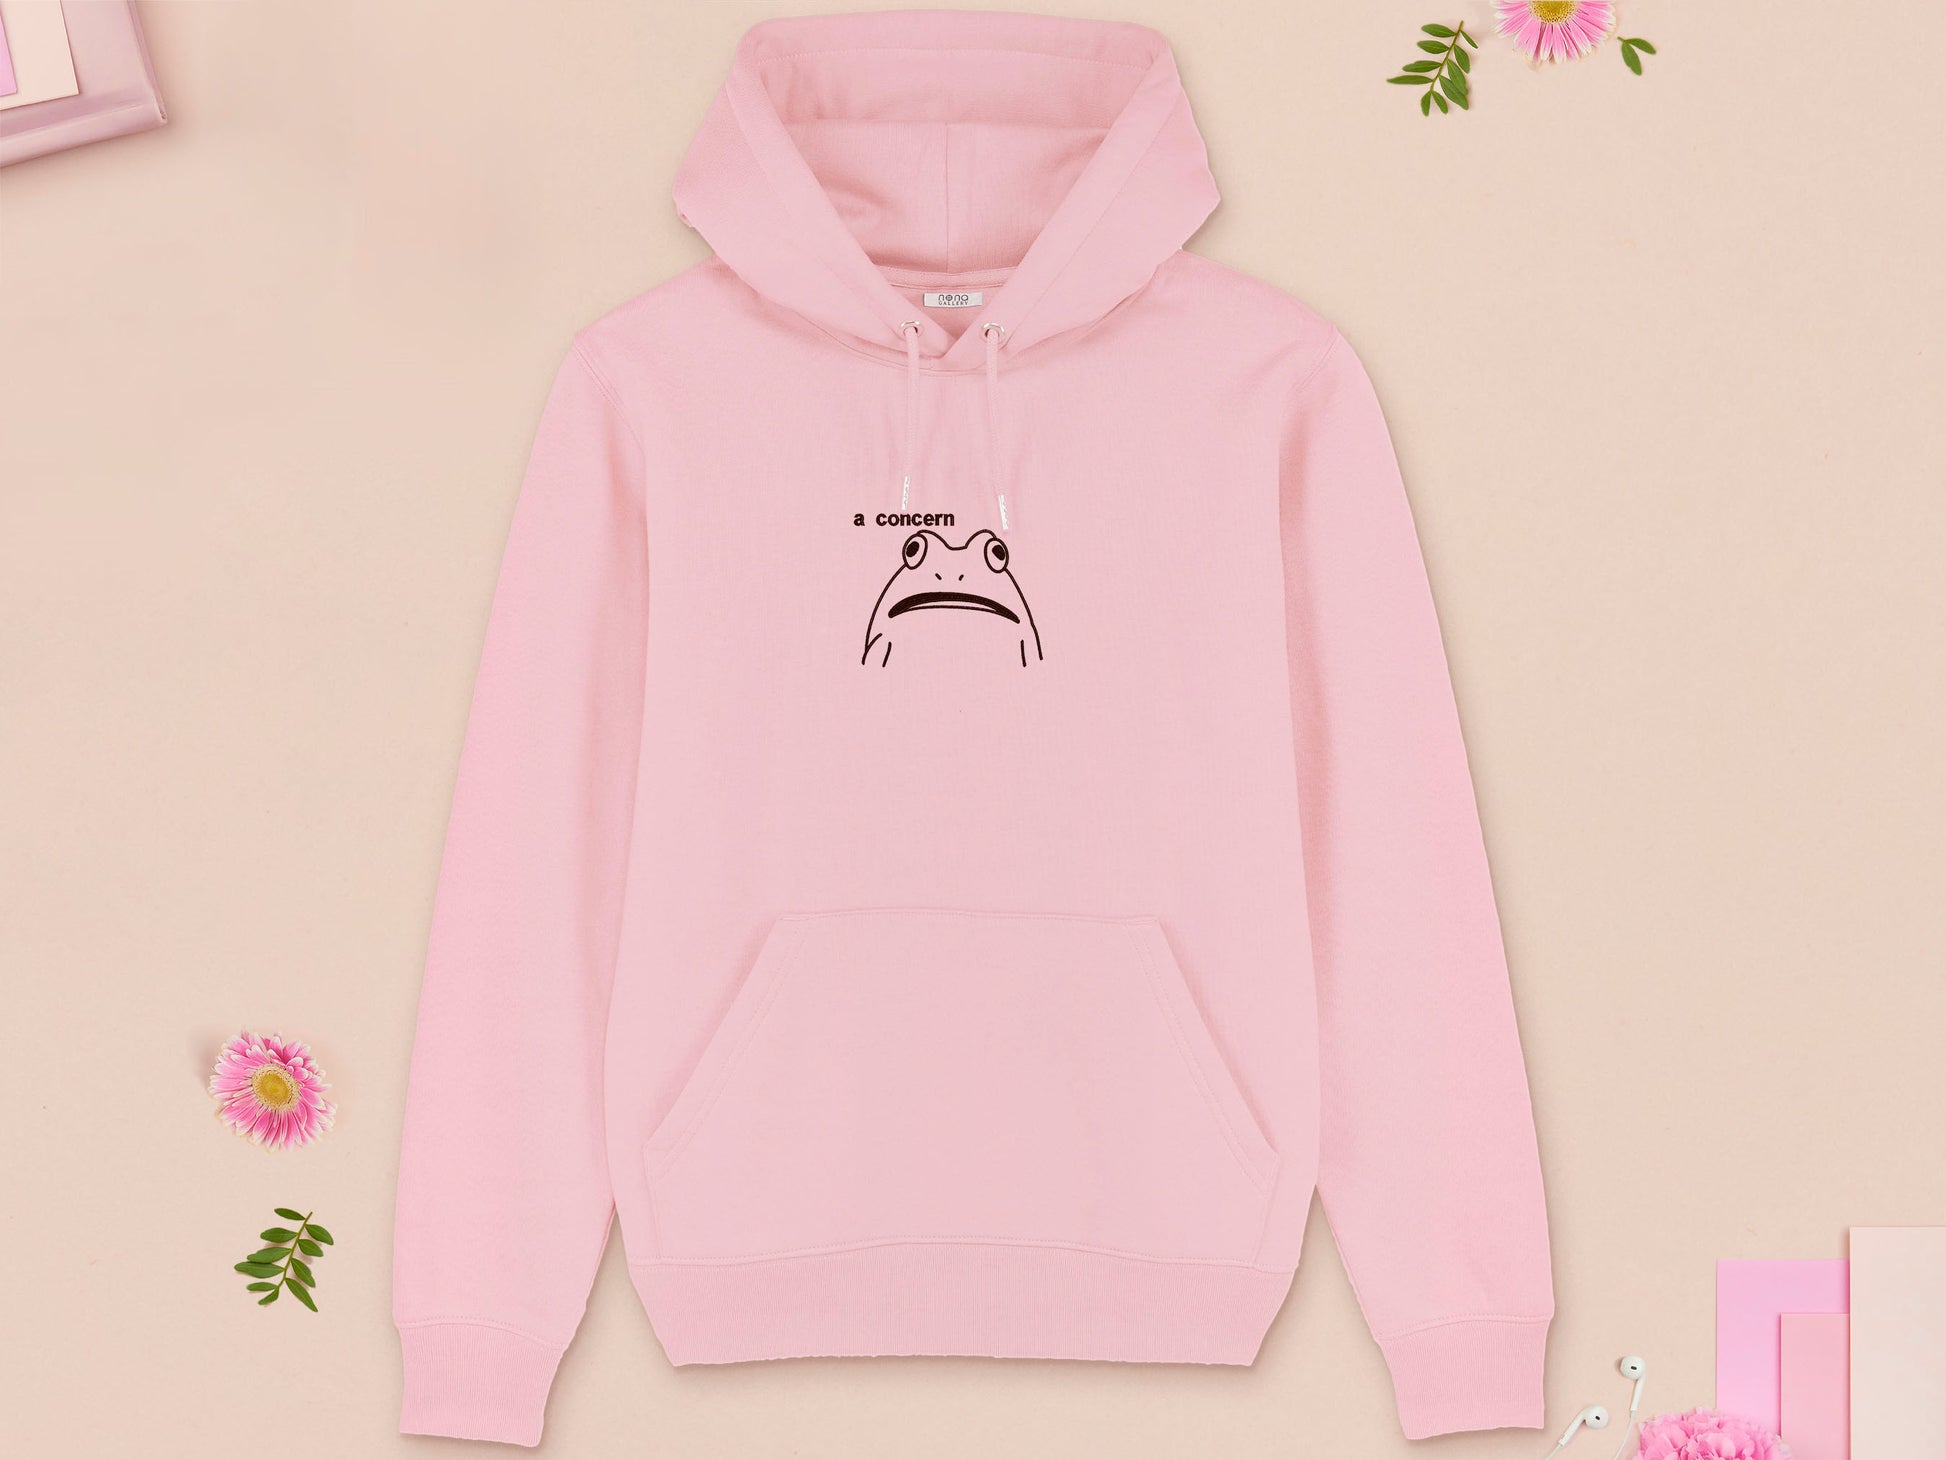 A pink long sleeve fleece hoodie, with an embroidered brown thread design of cute confused looking frog with the text a concern.